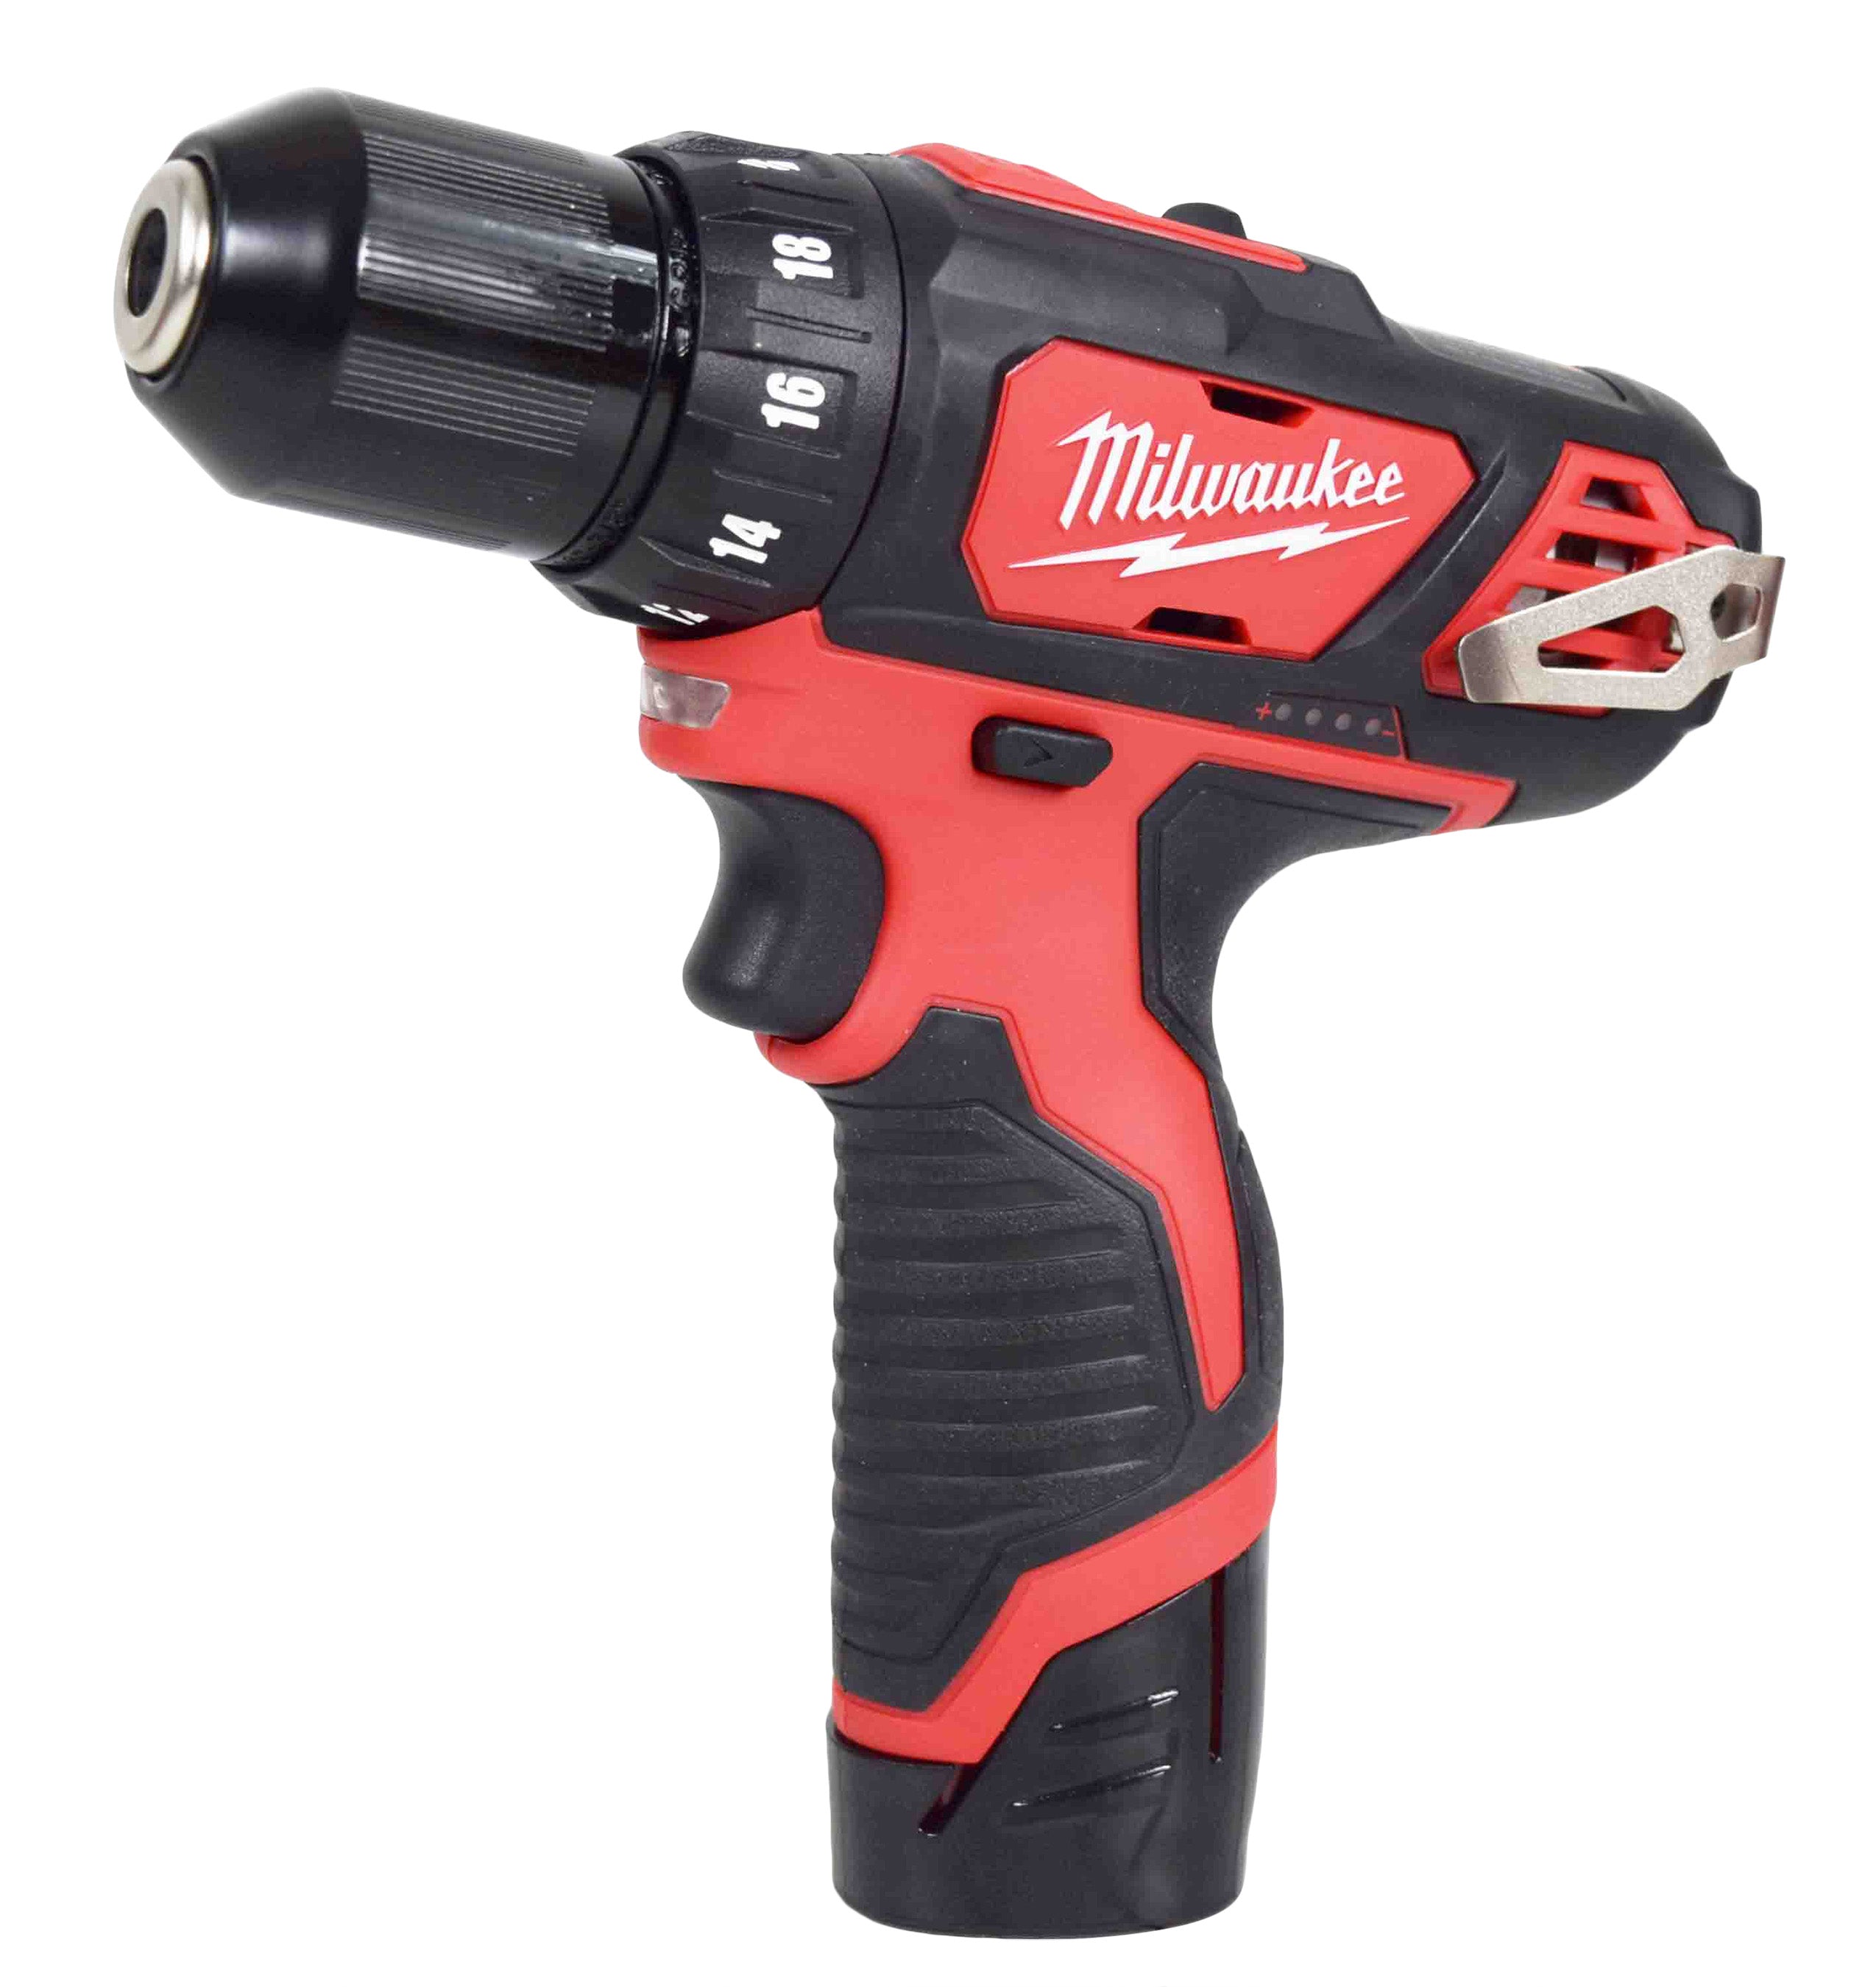 Milwaukee-2494-22-M12-Cordless-Combination-3-8-Drill-Driver-and-1-4-Hex-Impact-Driver-Dual-Power-Tool-Kit-2-Lithium-Ion-Batteries-Charger-and-Bag-Included-image-5